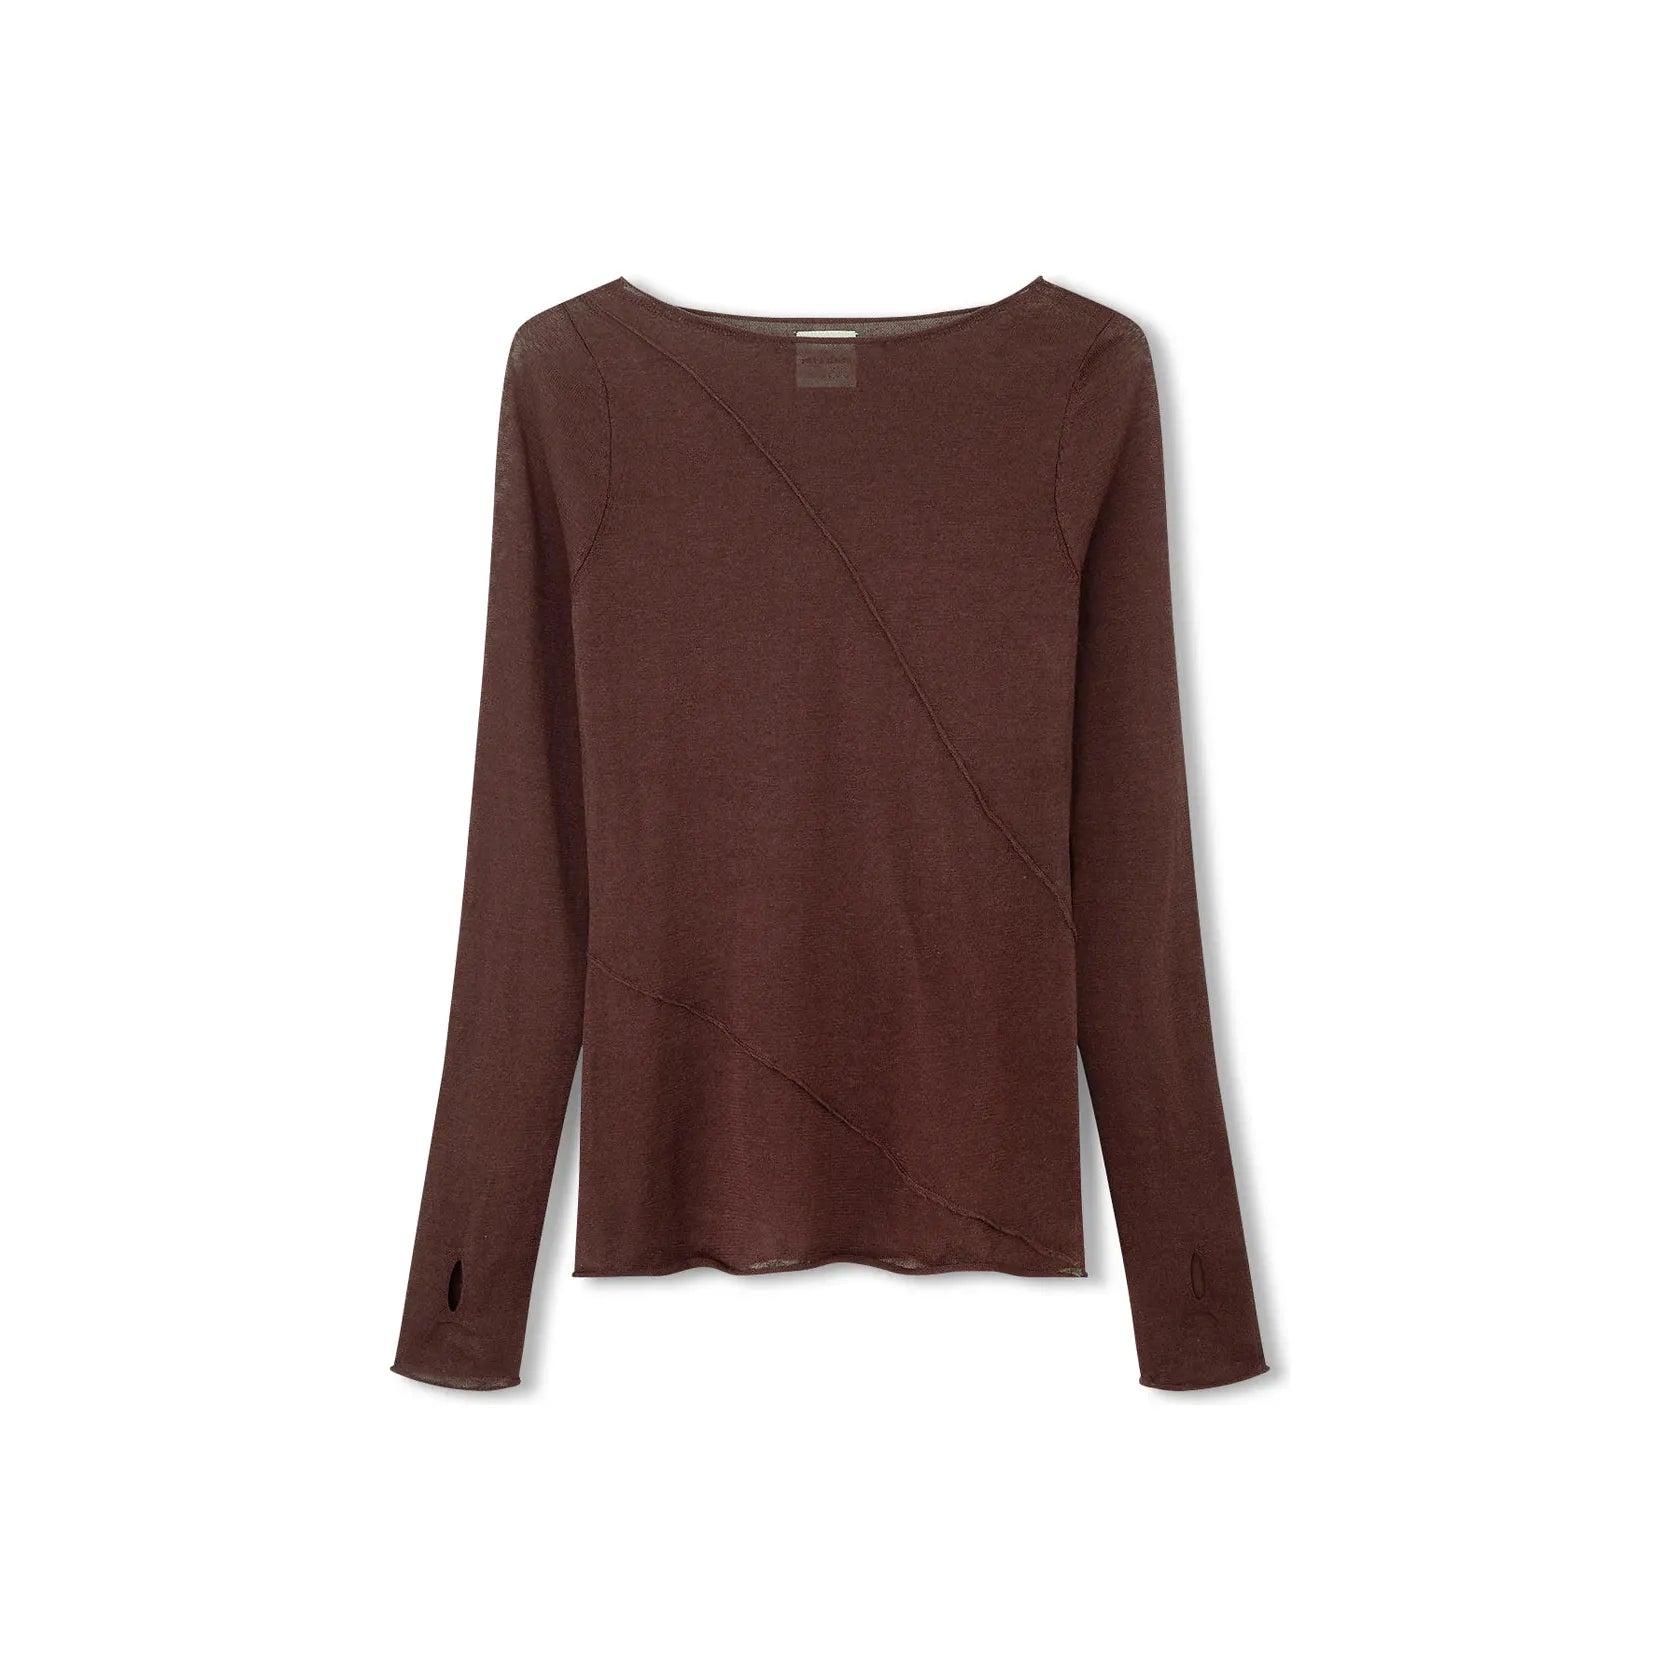 Zulu & Zephyr Currant Panelled Knit Top